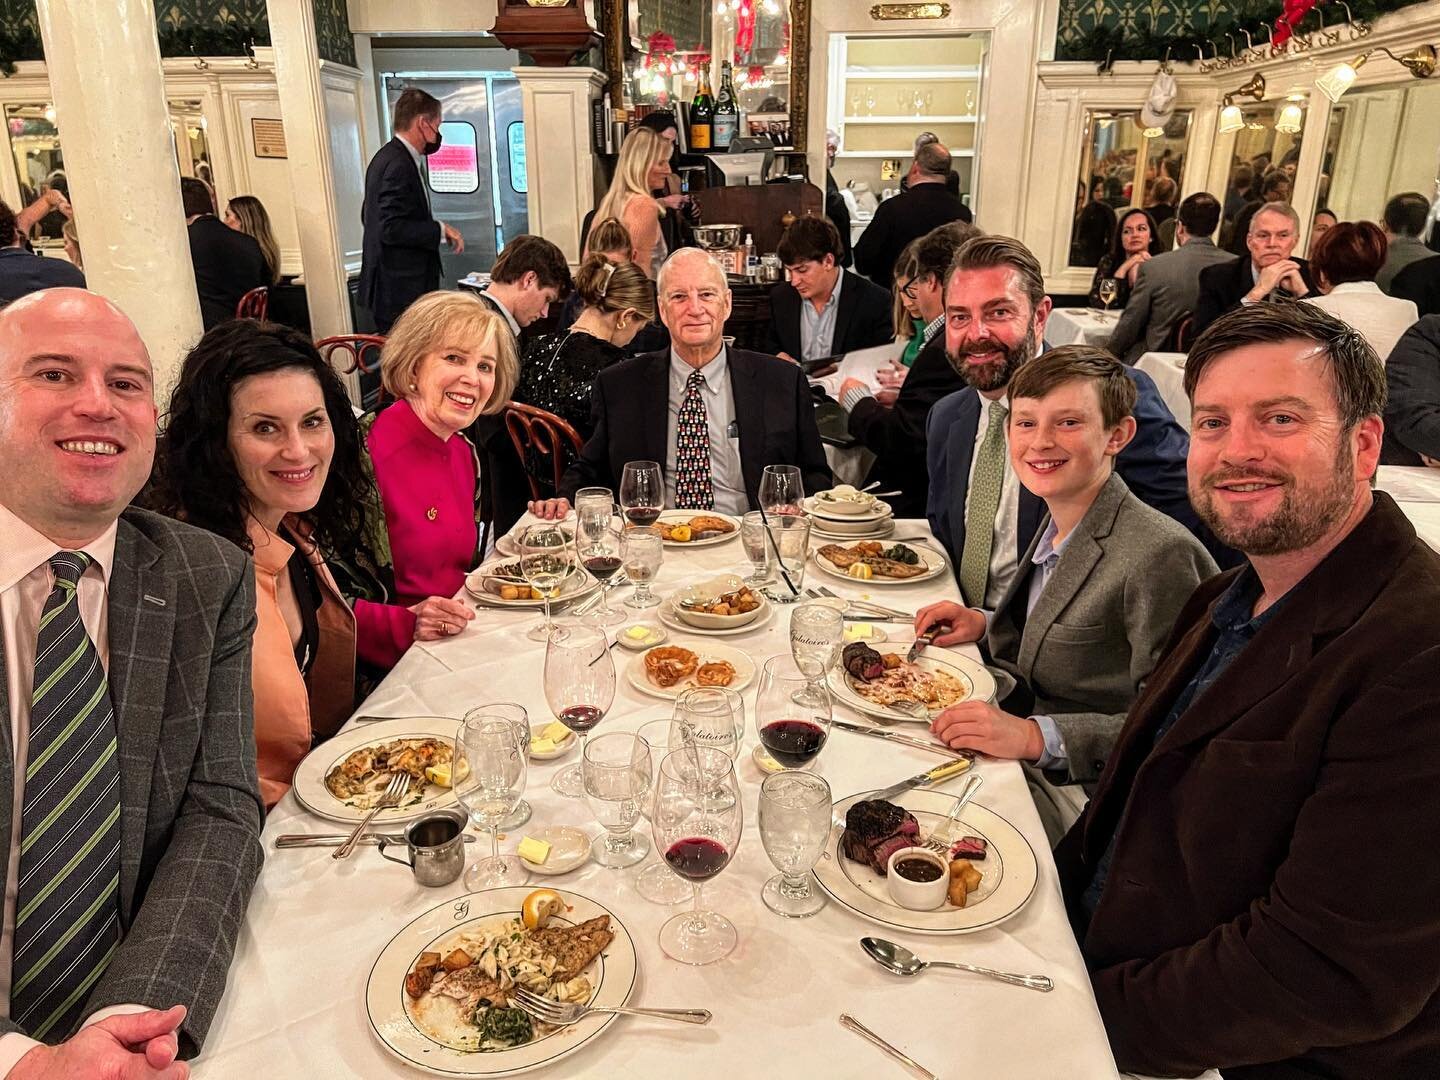 Boxing day celebrations at @galatoiresnola which is becoming a tradition!

#boxingday #nola #finedining #frenchquarter #neworleans #cajun #escargot #family #oldfashioned